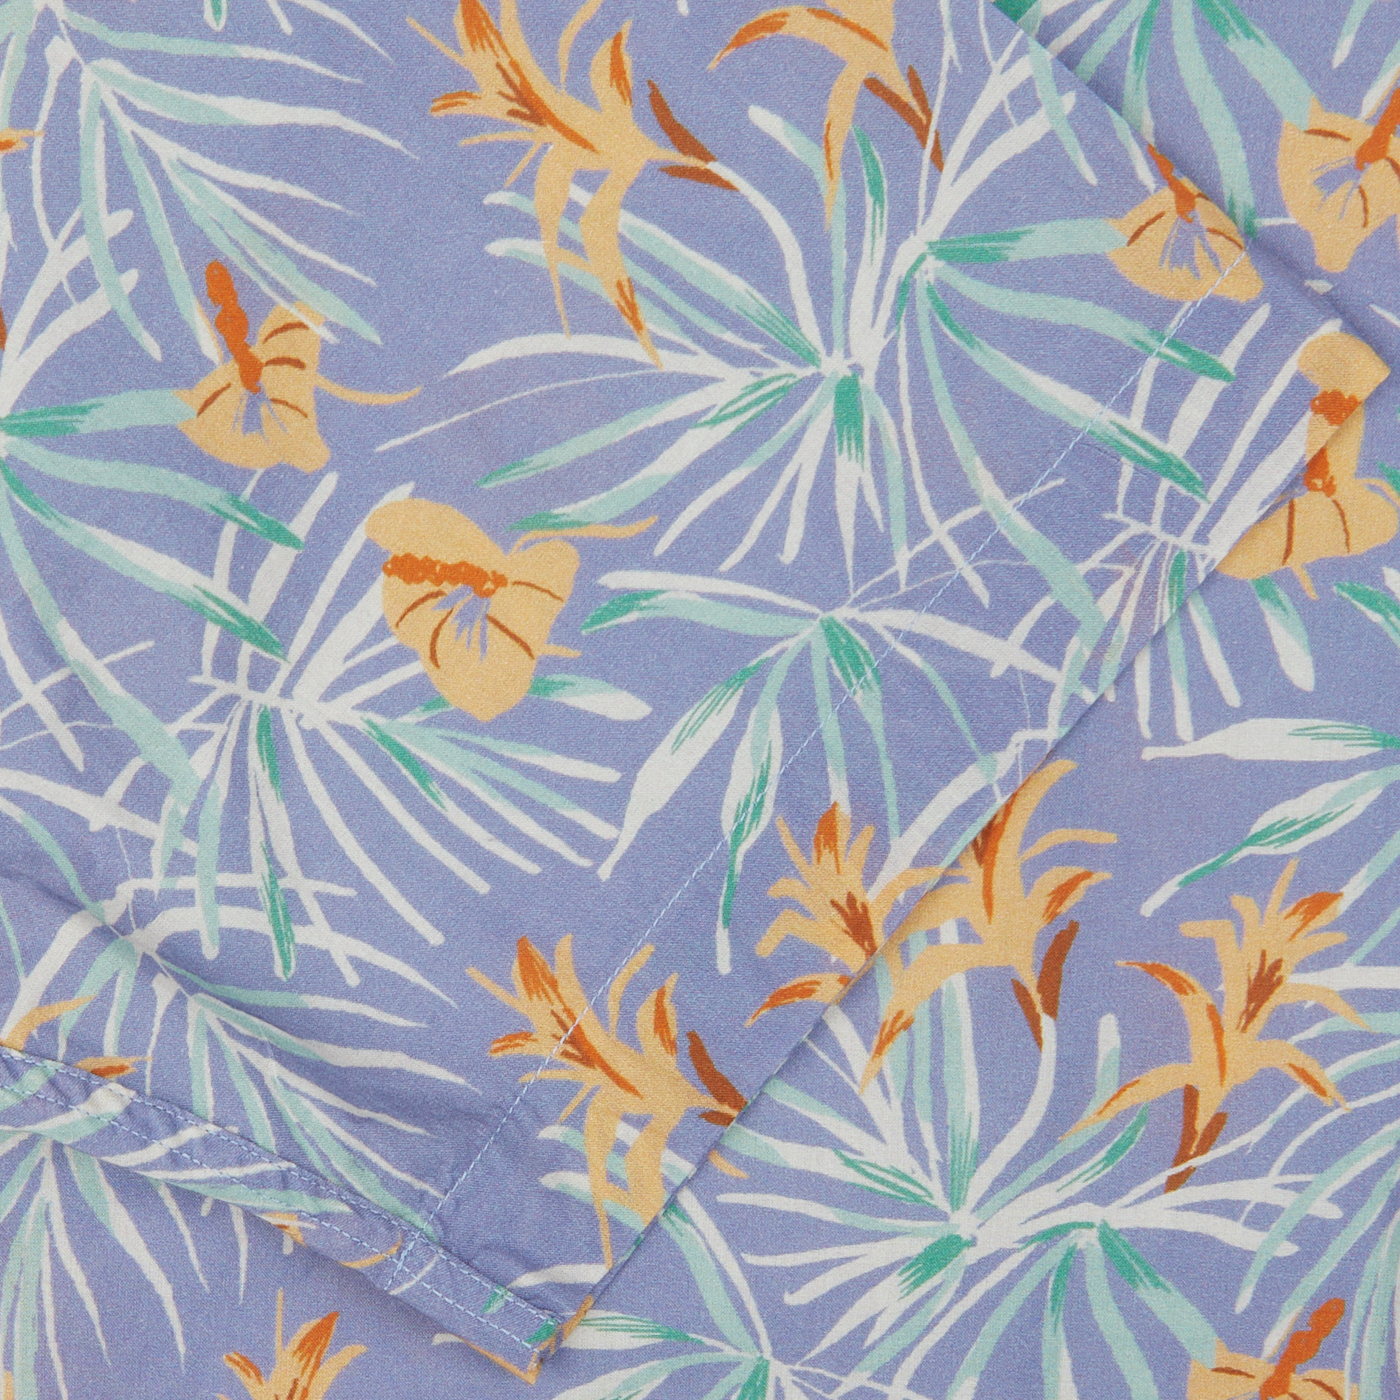 A close-up of an Altea Light Blue Floral Printed Cotton Shirt with a tropical design, featuring palm leaves and butterflies on a lavender background, perfect as a summer essential.